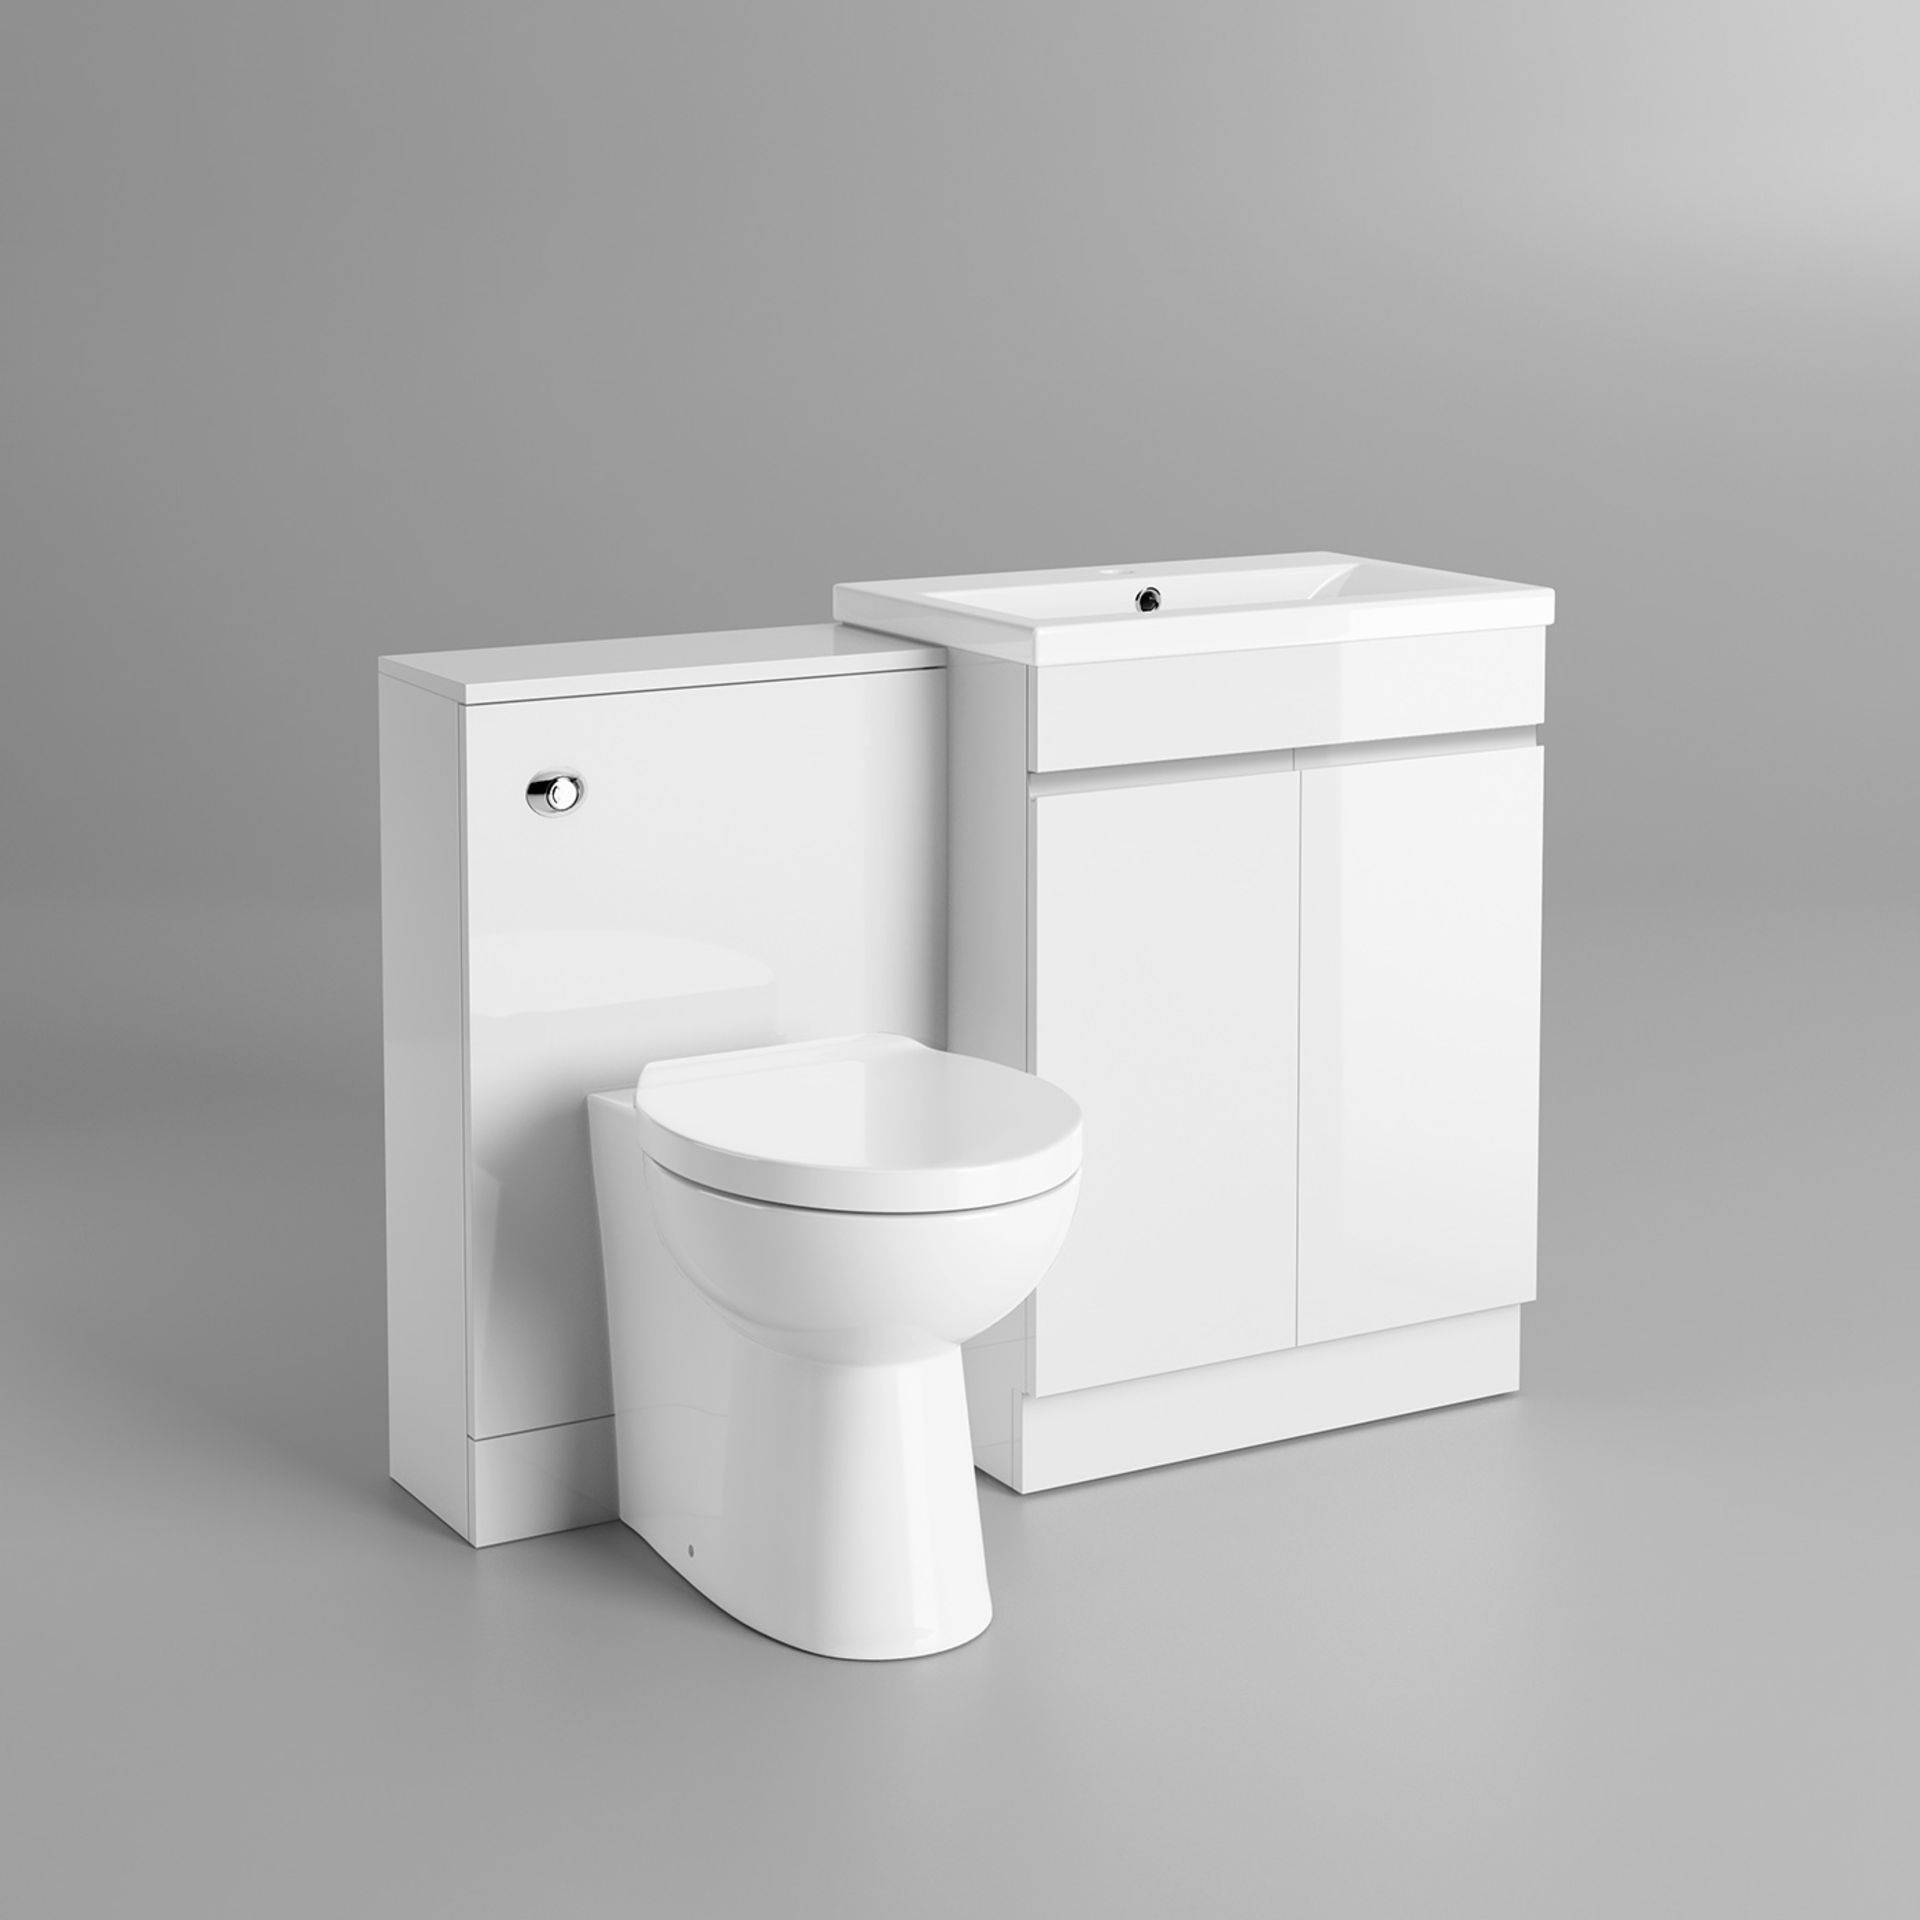 (J32) 1100mm Complete Basin Vanity Unit with Toilet Pan & Back to Wall Unit. RRP £899.99. This set - Image 4 of 5